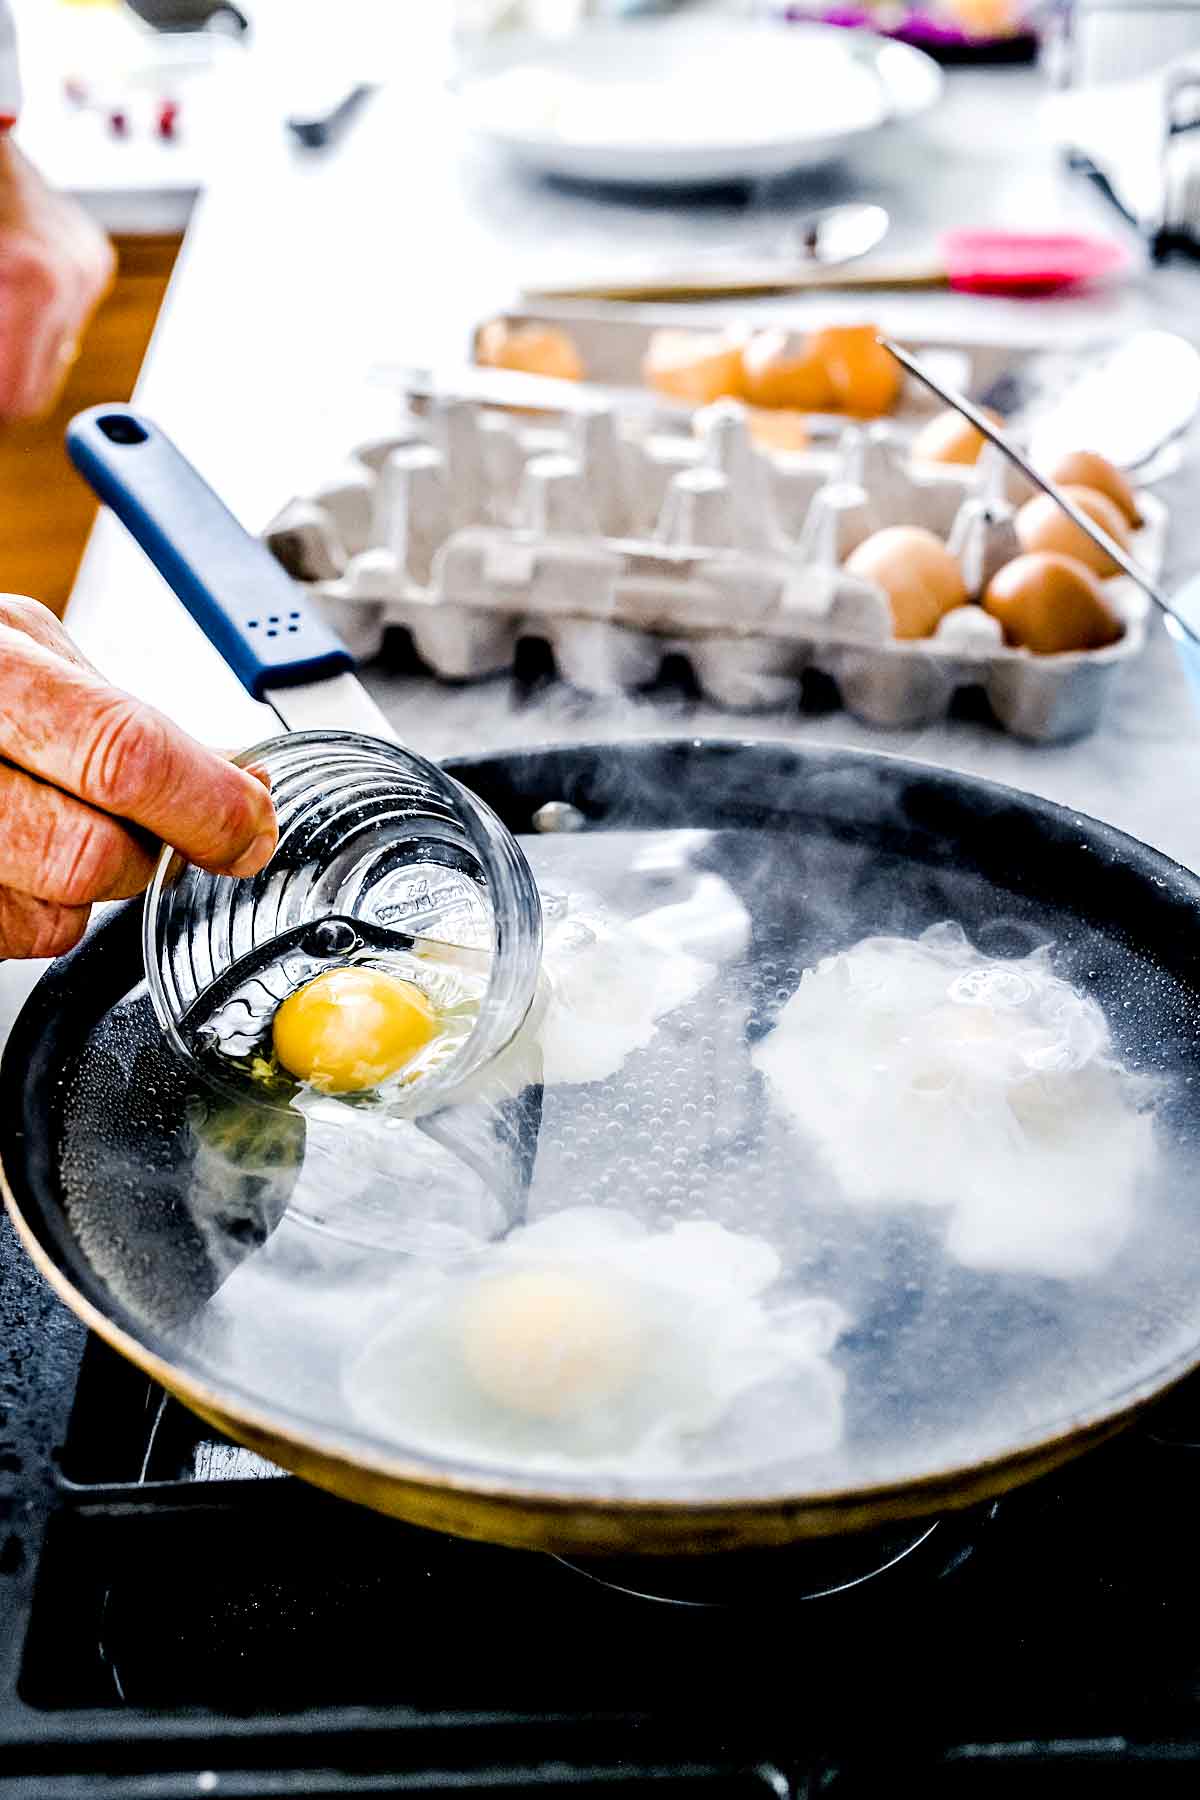 https://www.foodiecrush.com/poached-eggs/how-to-poach-eggs-foodiecrush-com-009/